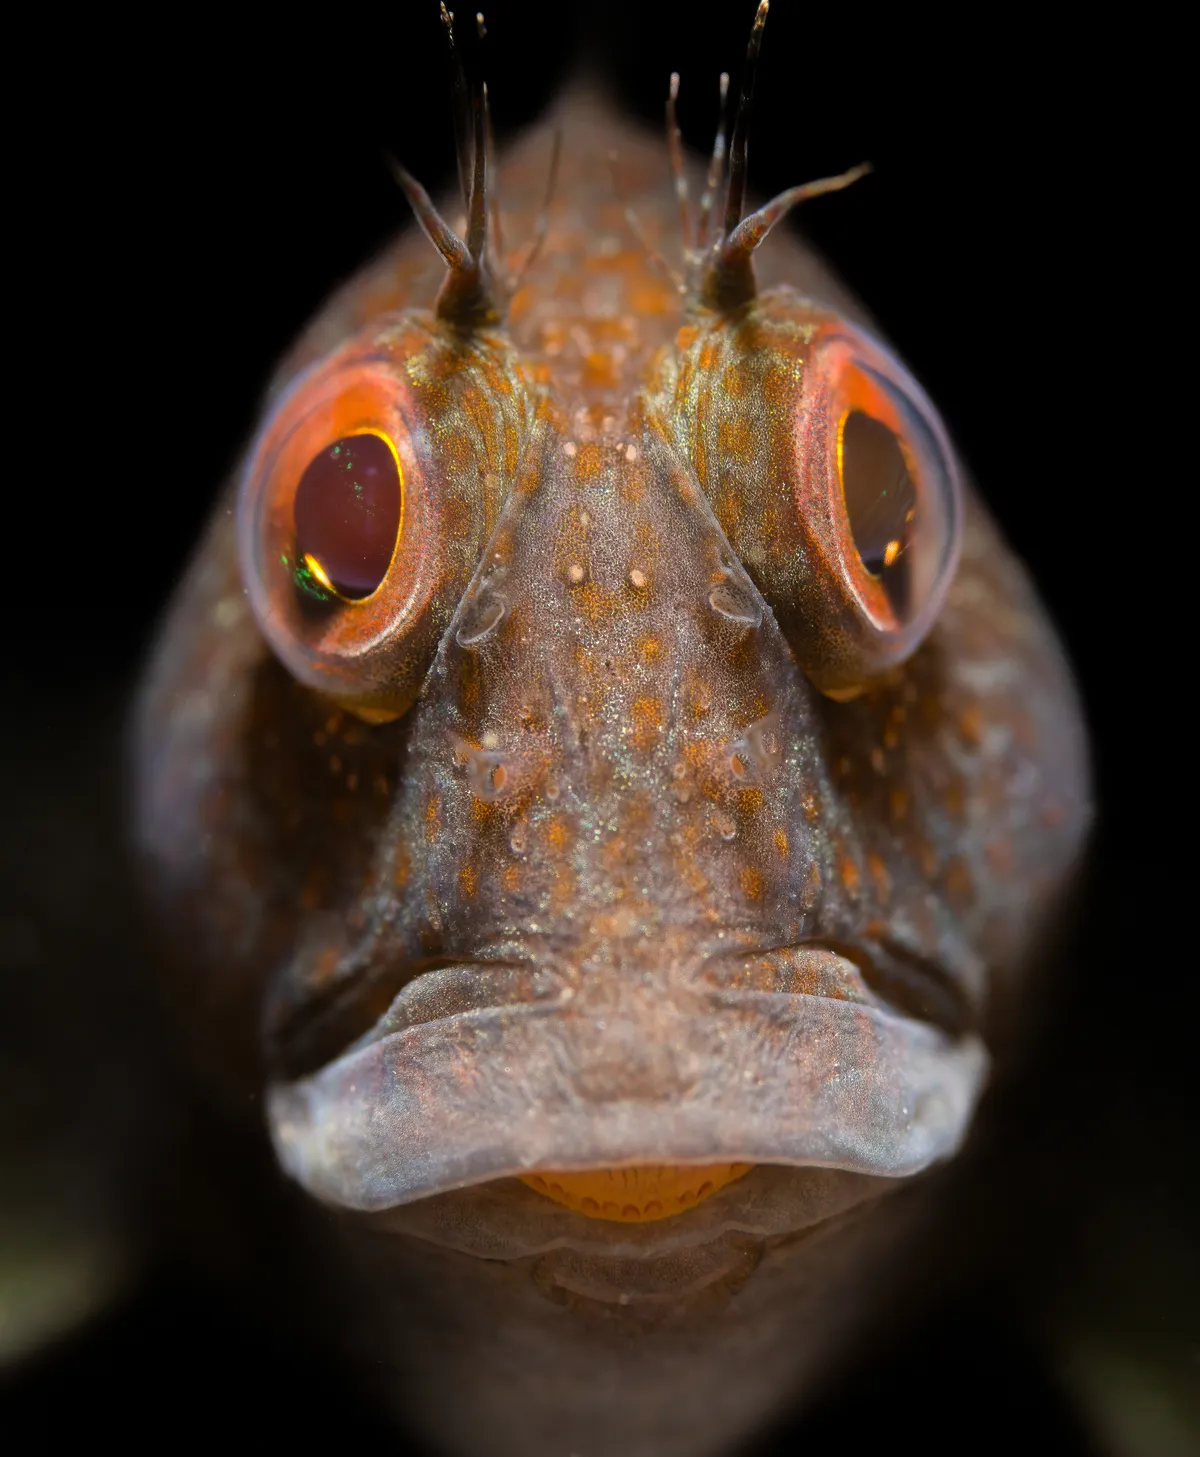 British Waters Macro category: Portrait of a variable blenny, UK. © Malcolm Nimmo (UK)/Underwater Photographer of the Year 2021